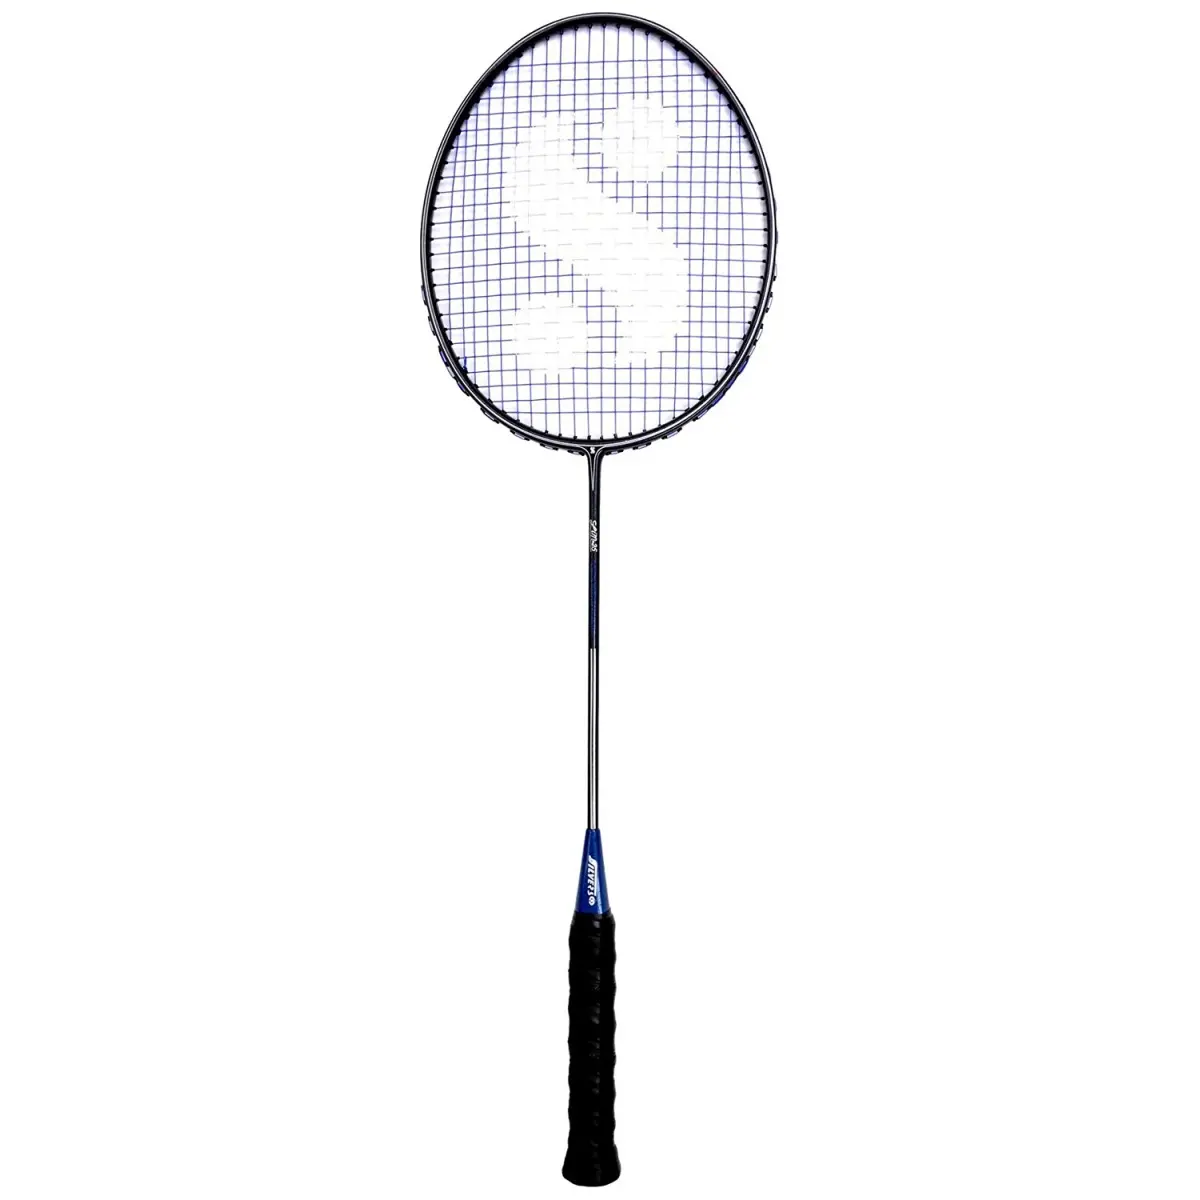 silvers lim 25 gutted badminton racquet